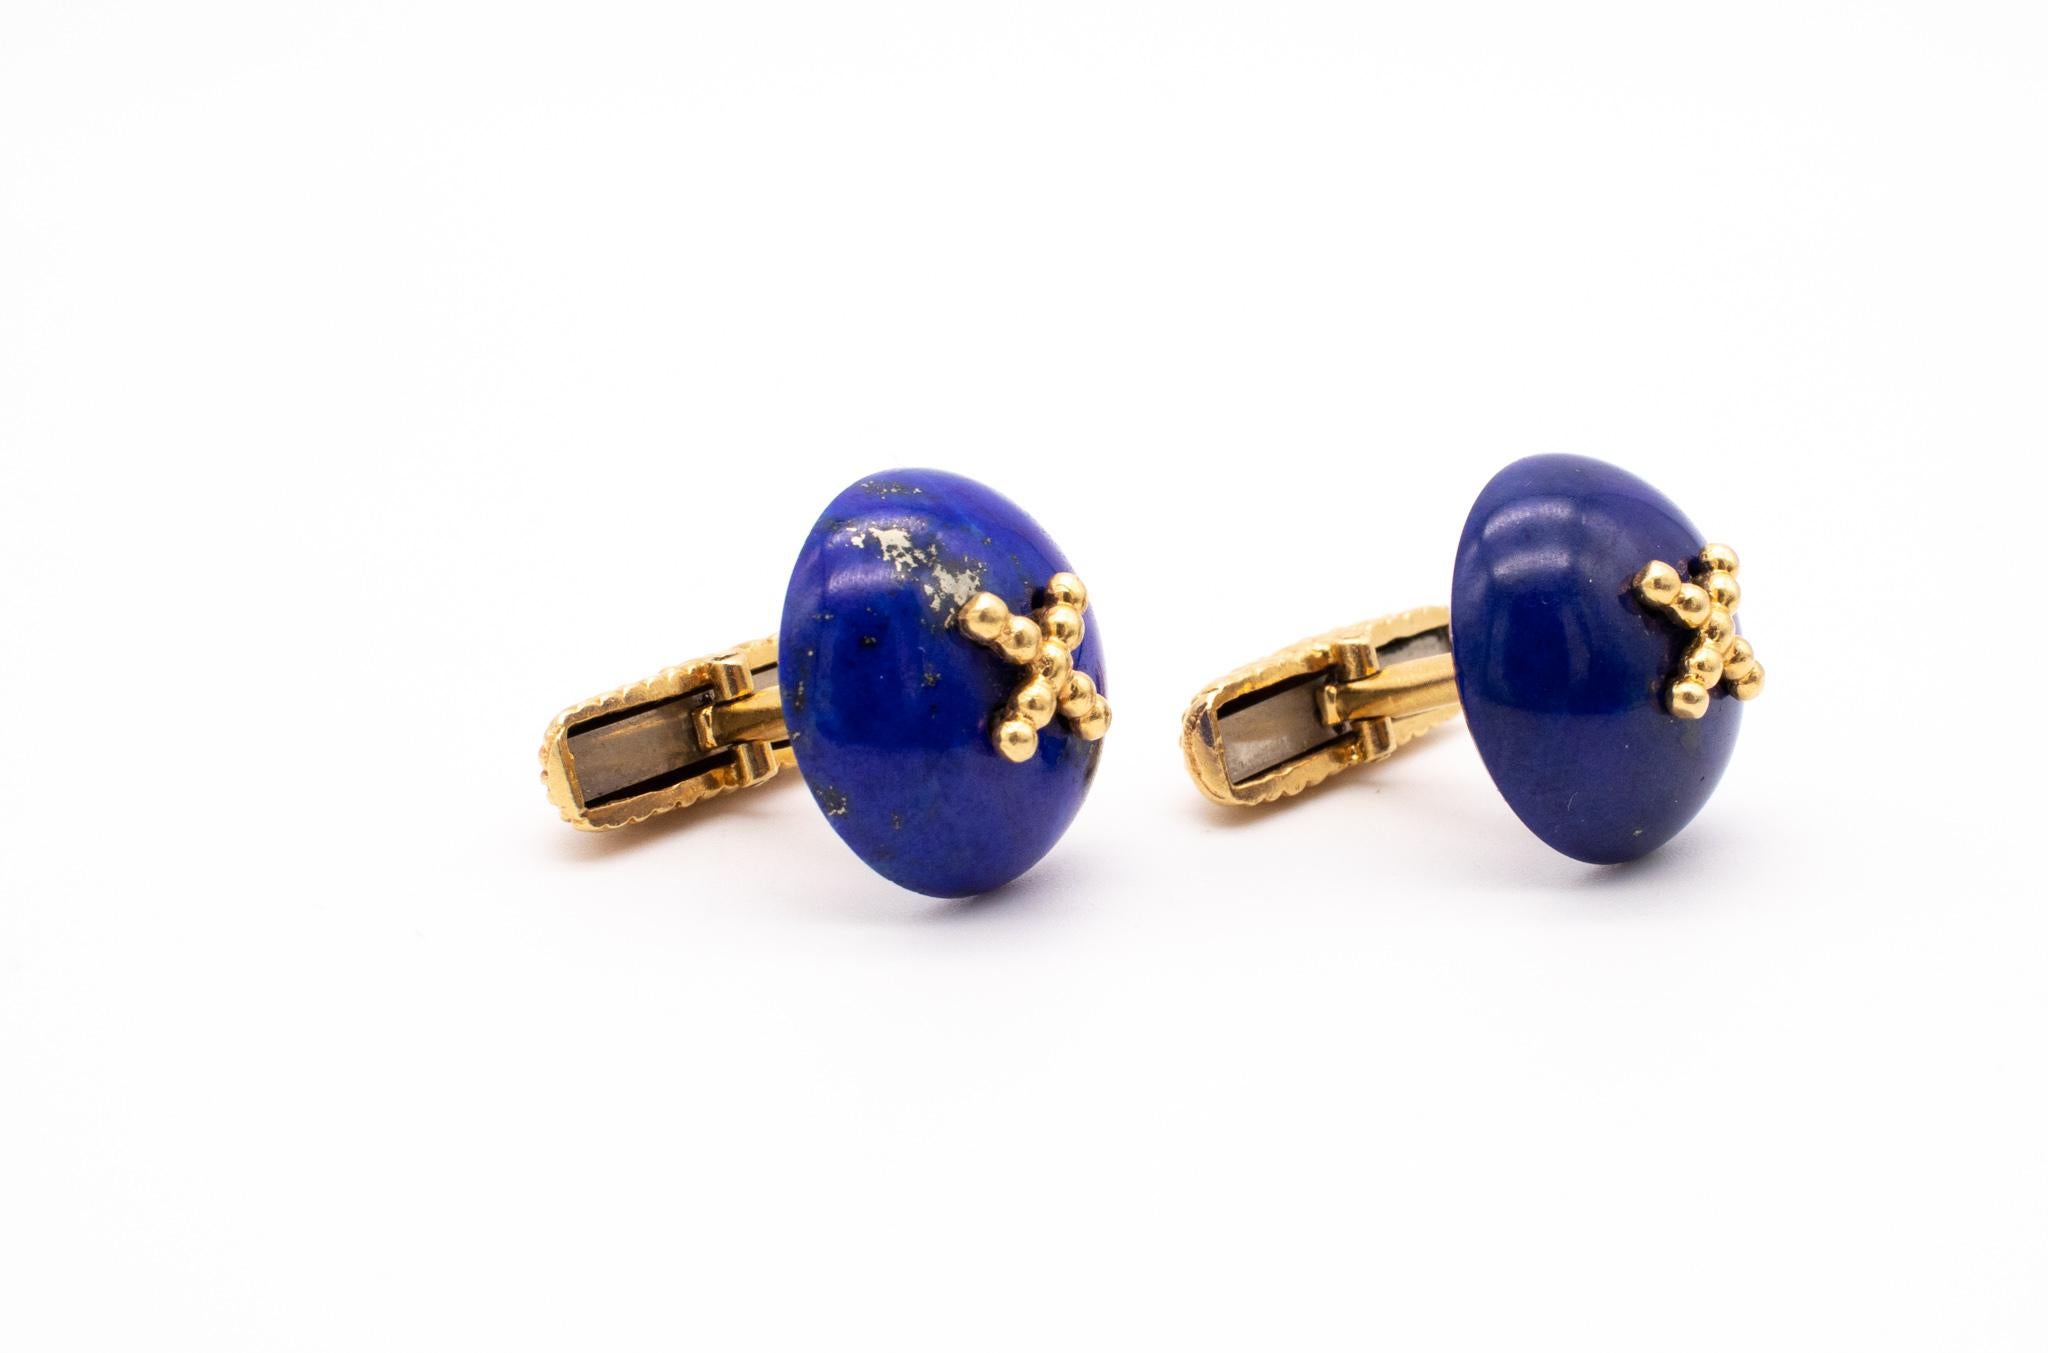 Modern Pair of Cufflinks in Textured 18Kt Yellow Gold with Lapis Lazuli For Sale 2